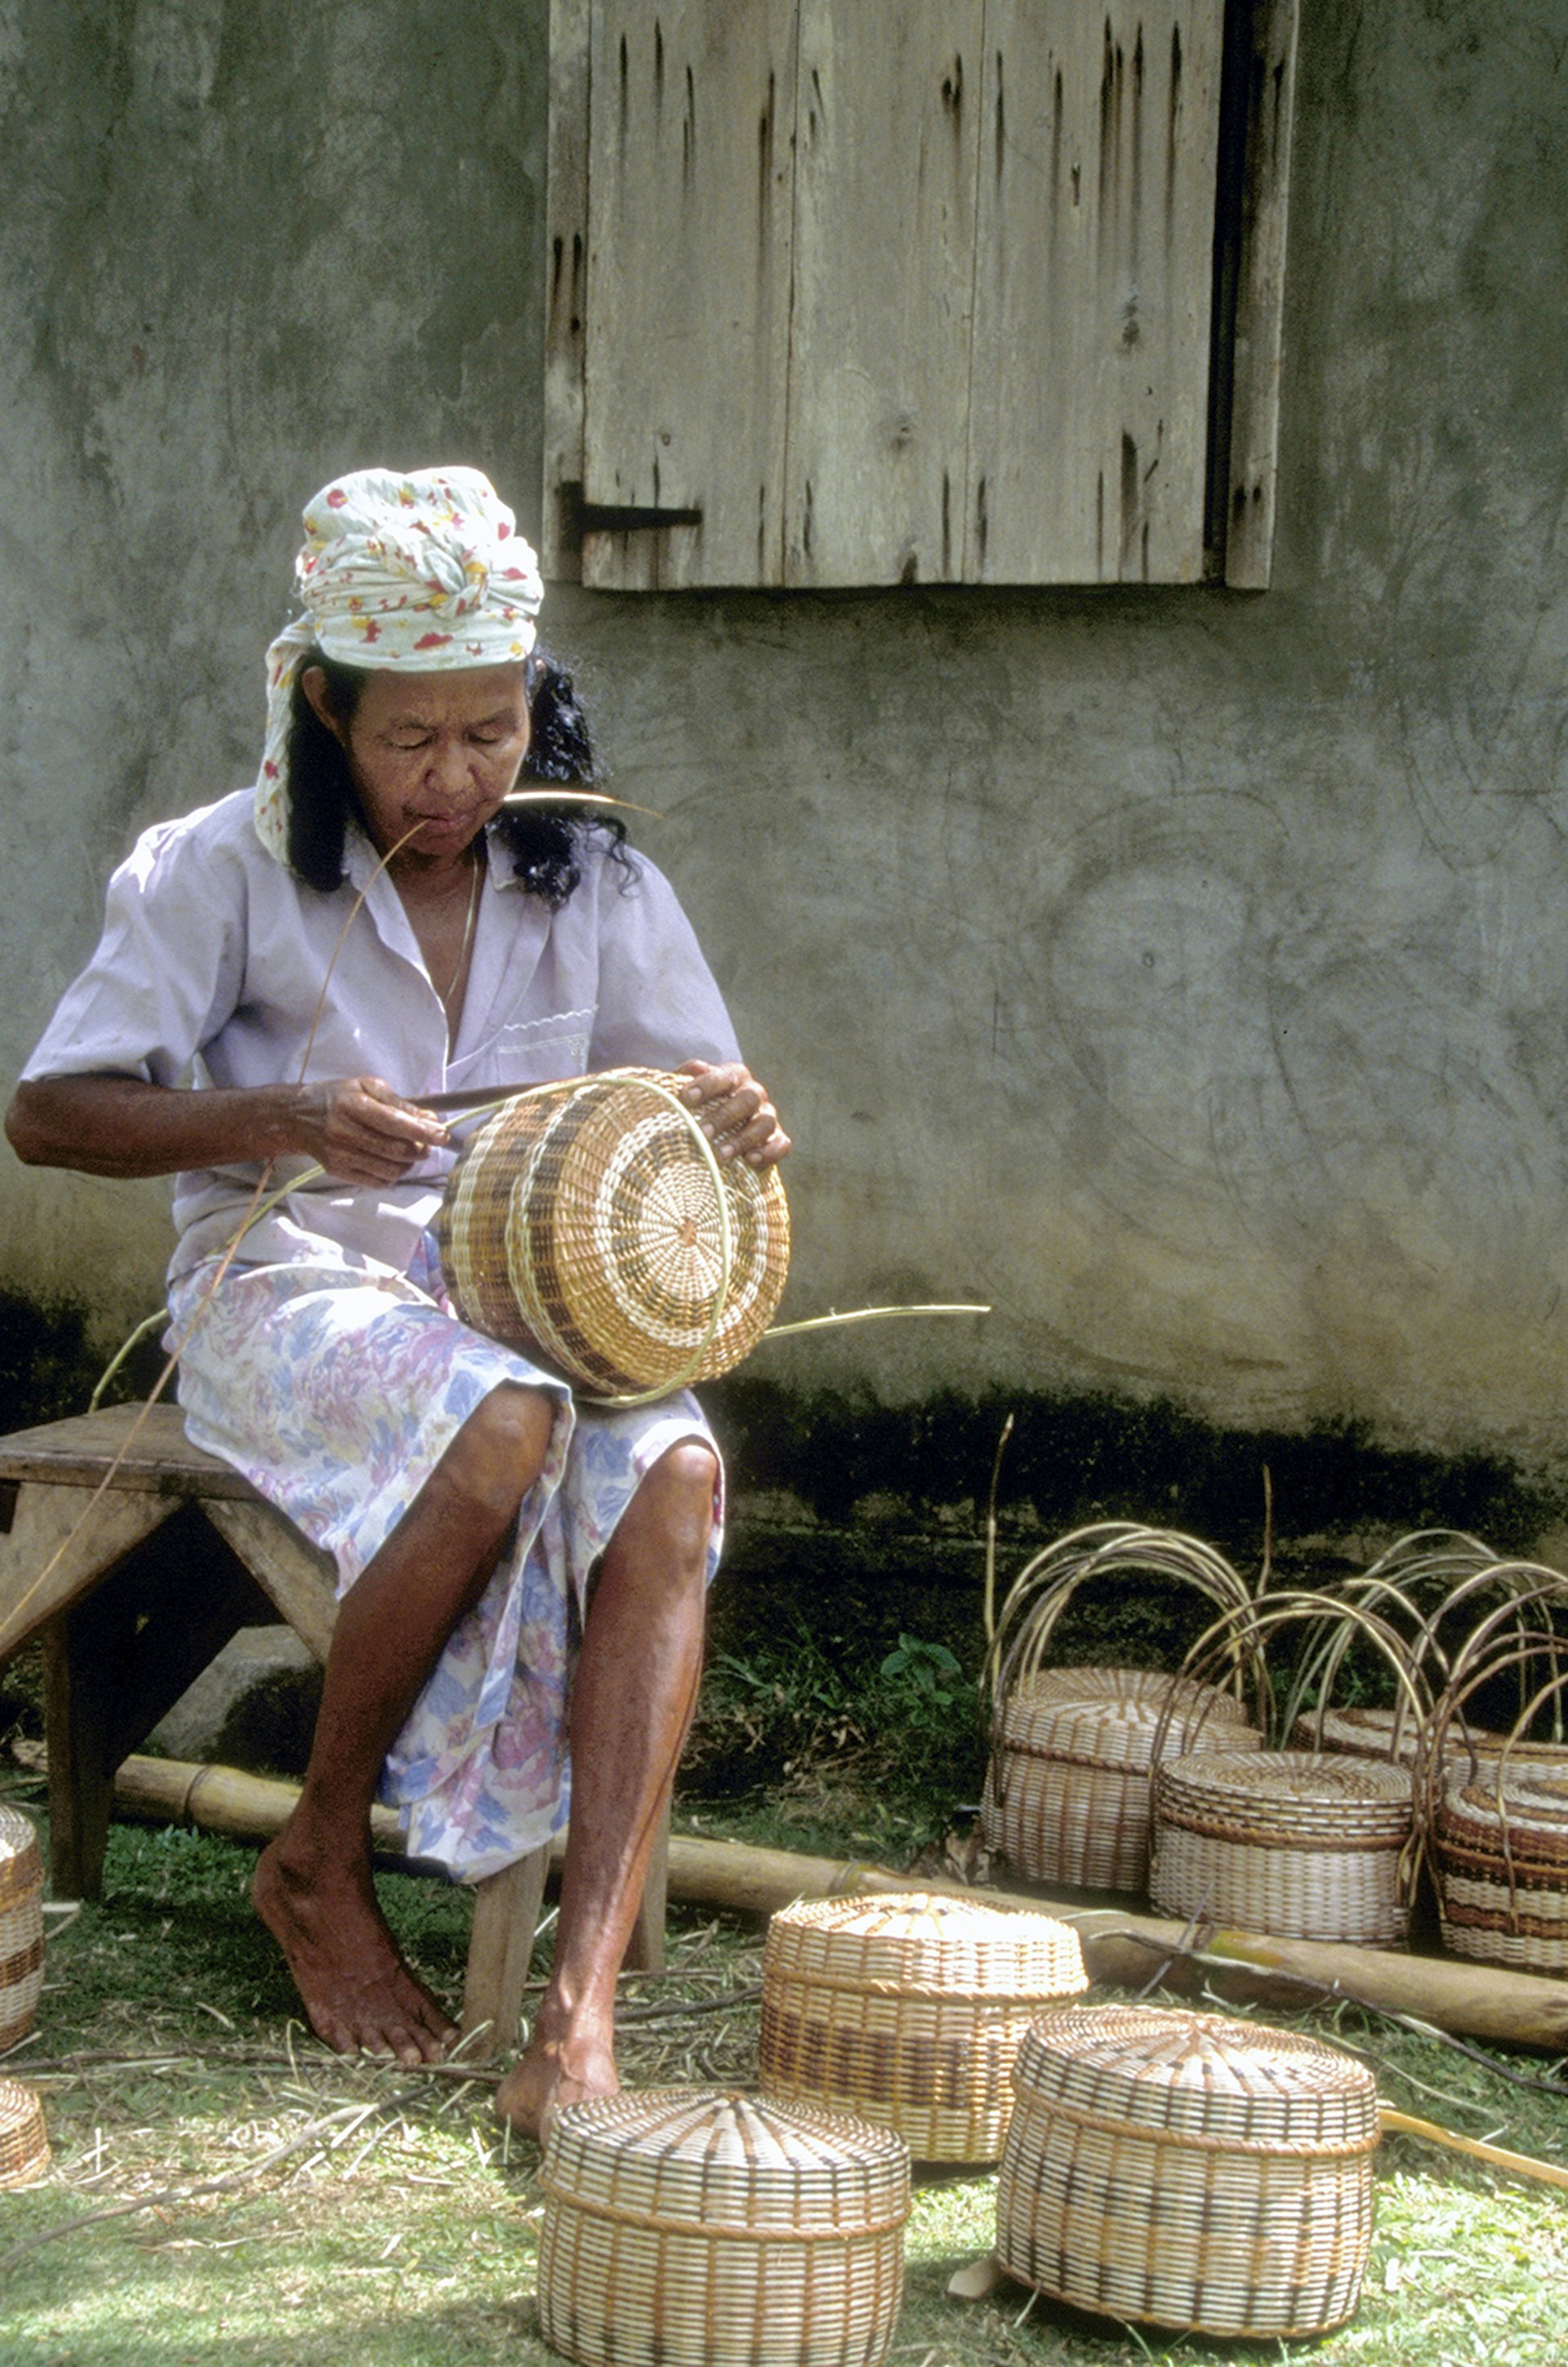 A Kalinago woman weaves baskets © Danita Delimont / Getty Images